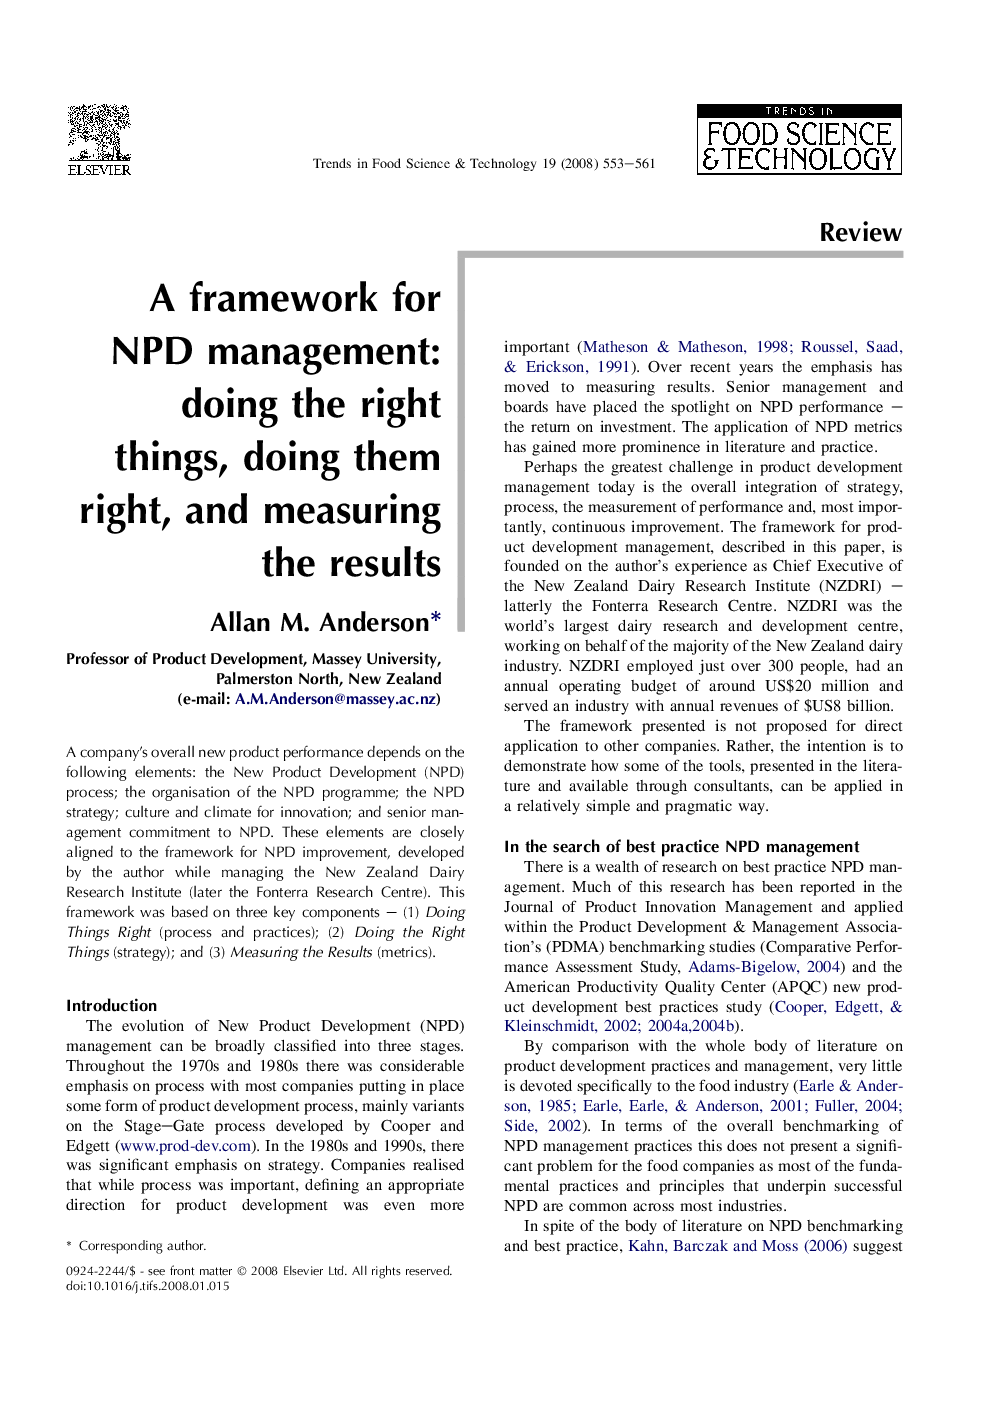 A framework for NPD management: doing the right things, doing them right, and measuring the results